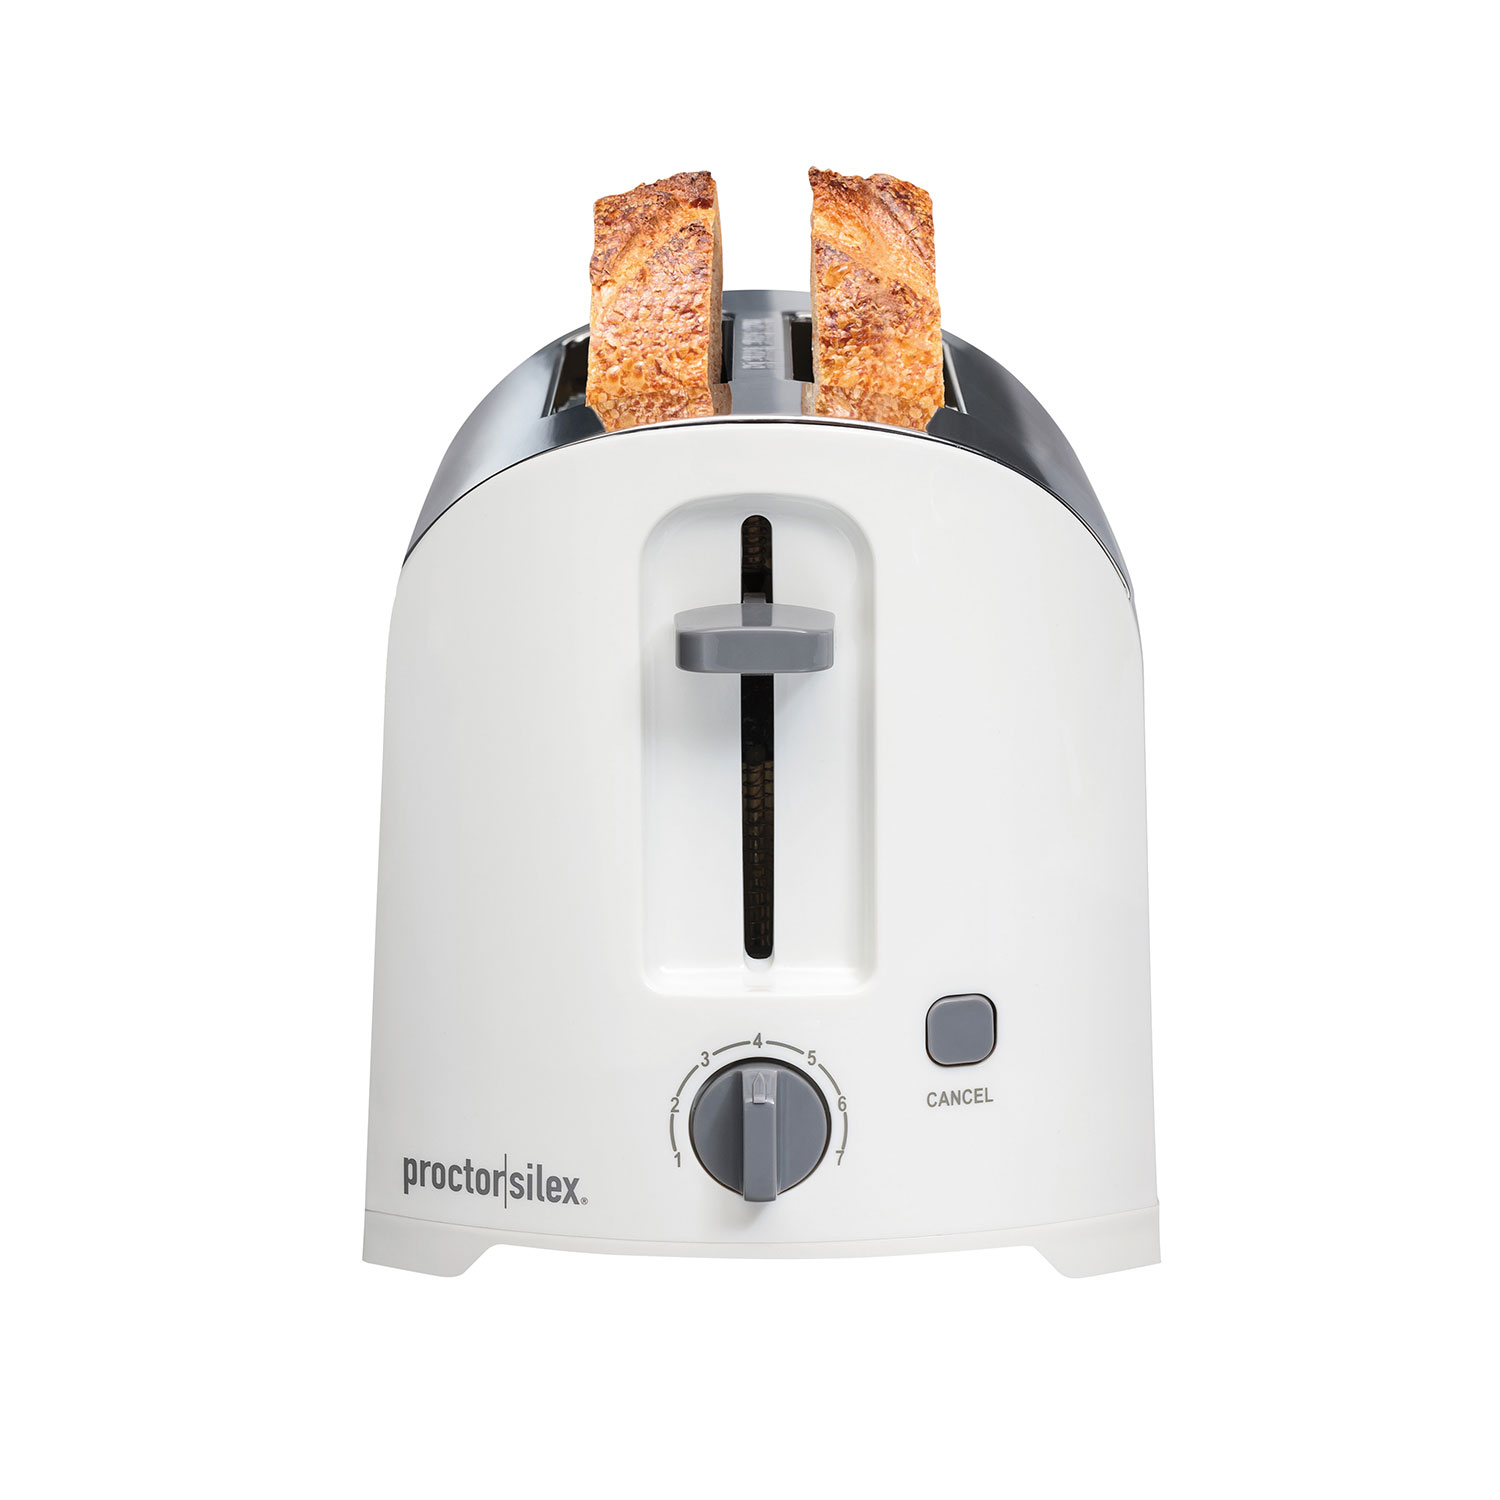 2 Slice Toaster - 22632PS